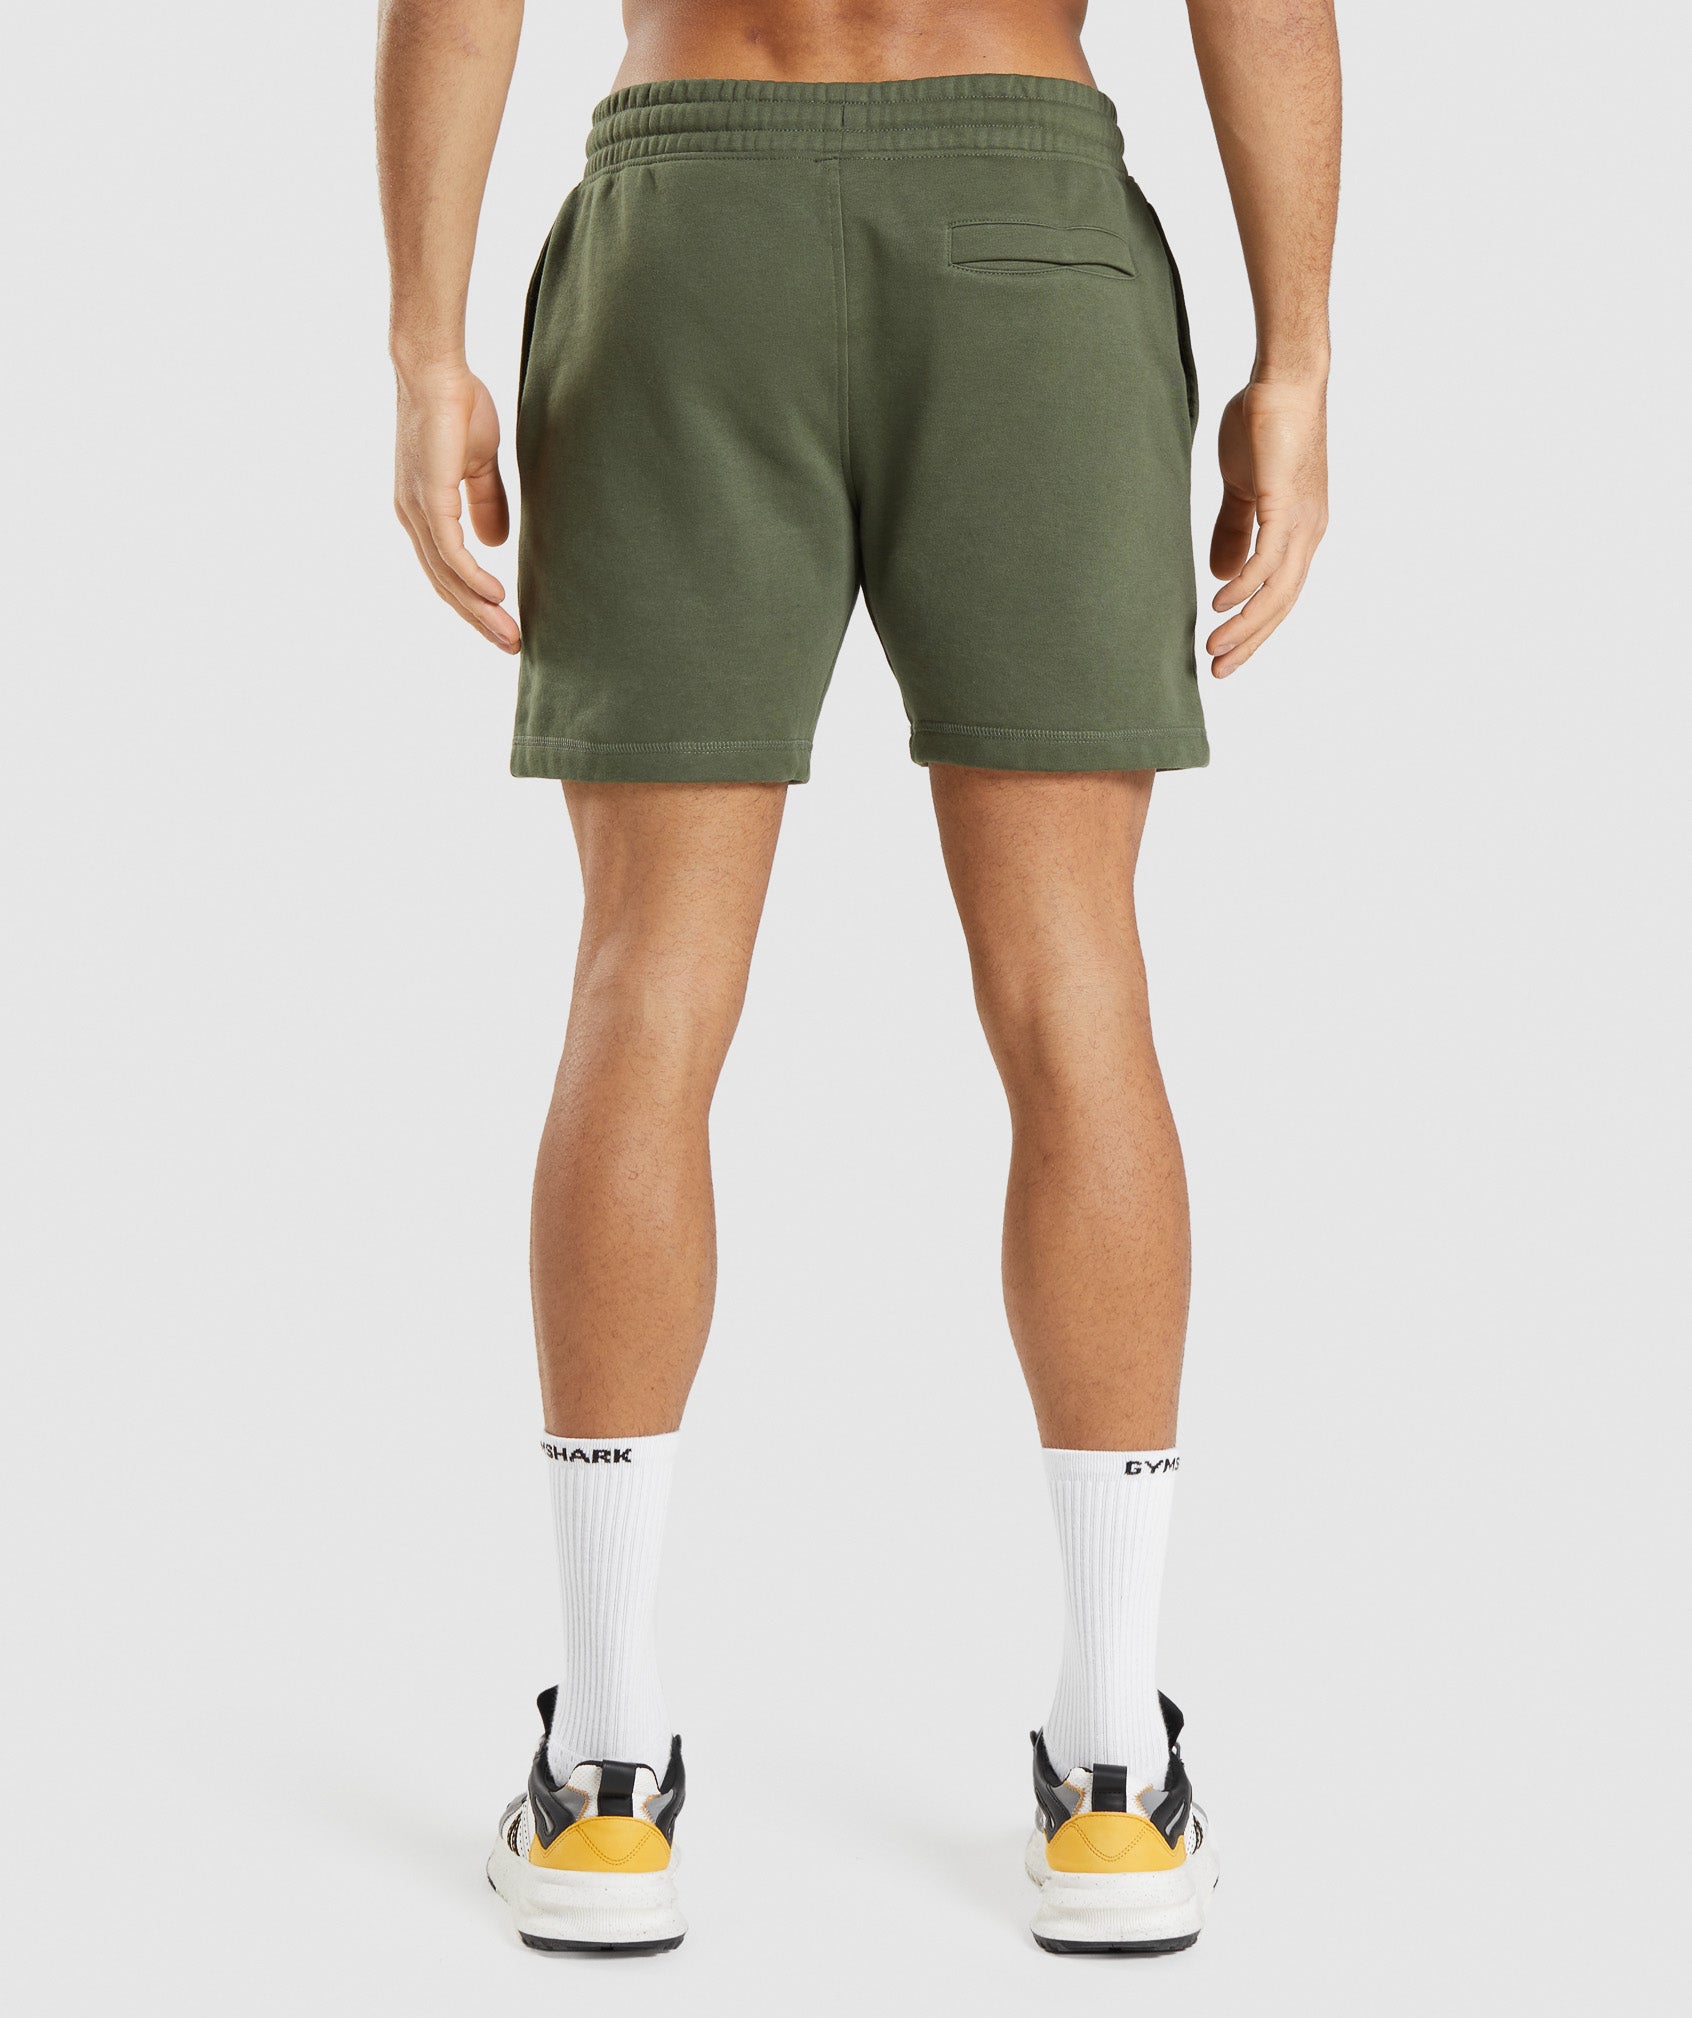 Crest Shorts in Core Olive - view 3